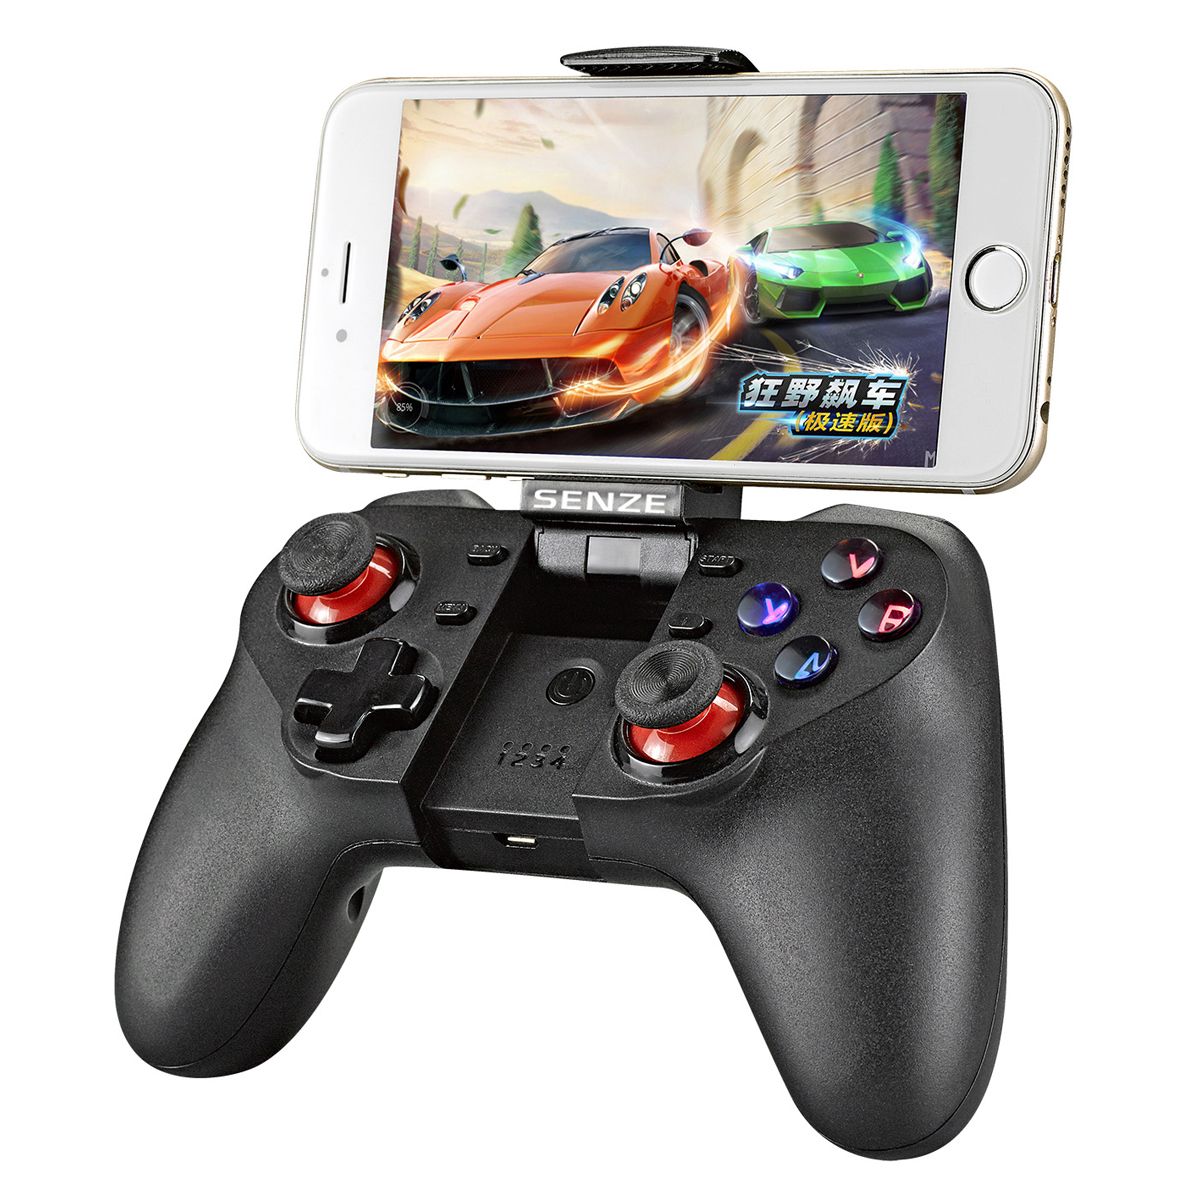 Senze-SZ-A1019-bluetooth-Gamepad-with-Bracket-Game-Controller-for-iOS-Android-Mobile-Phone-TV-Box-PC-1623865